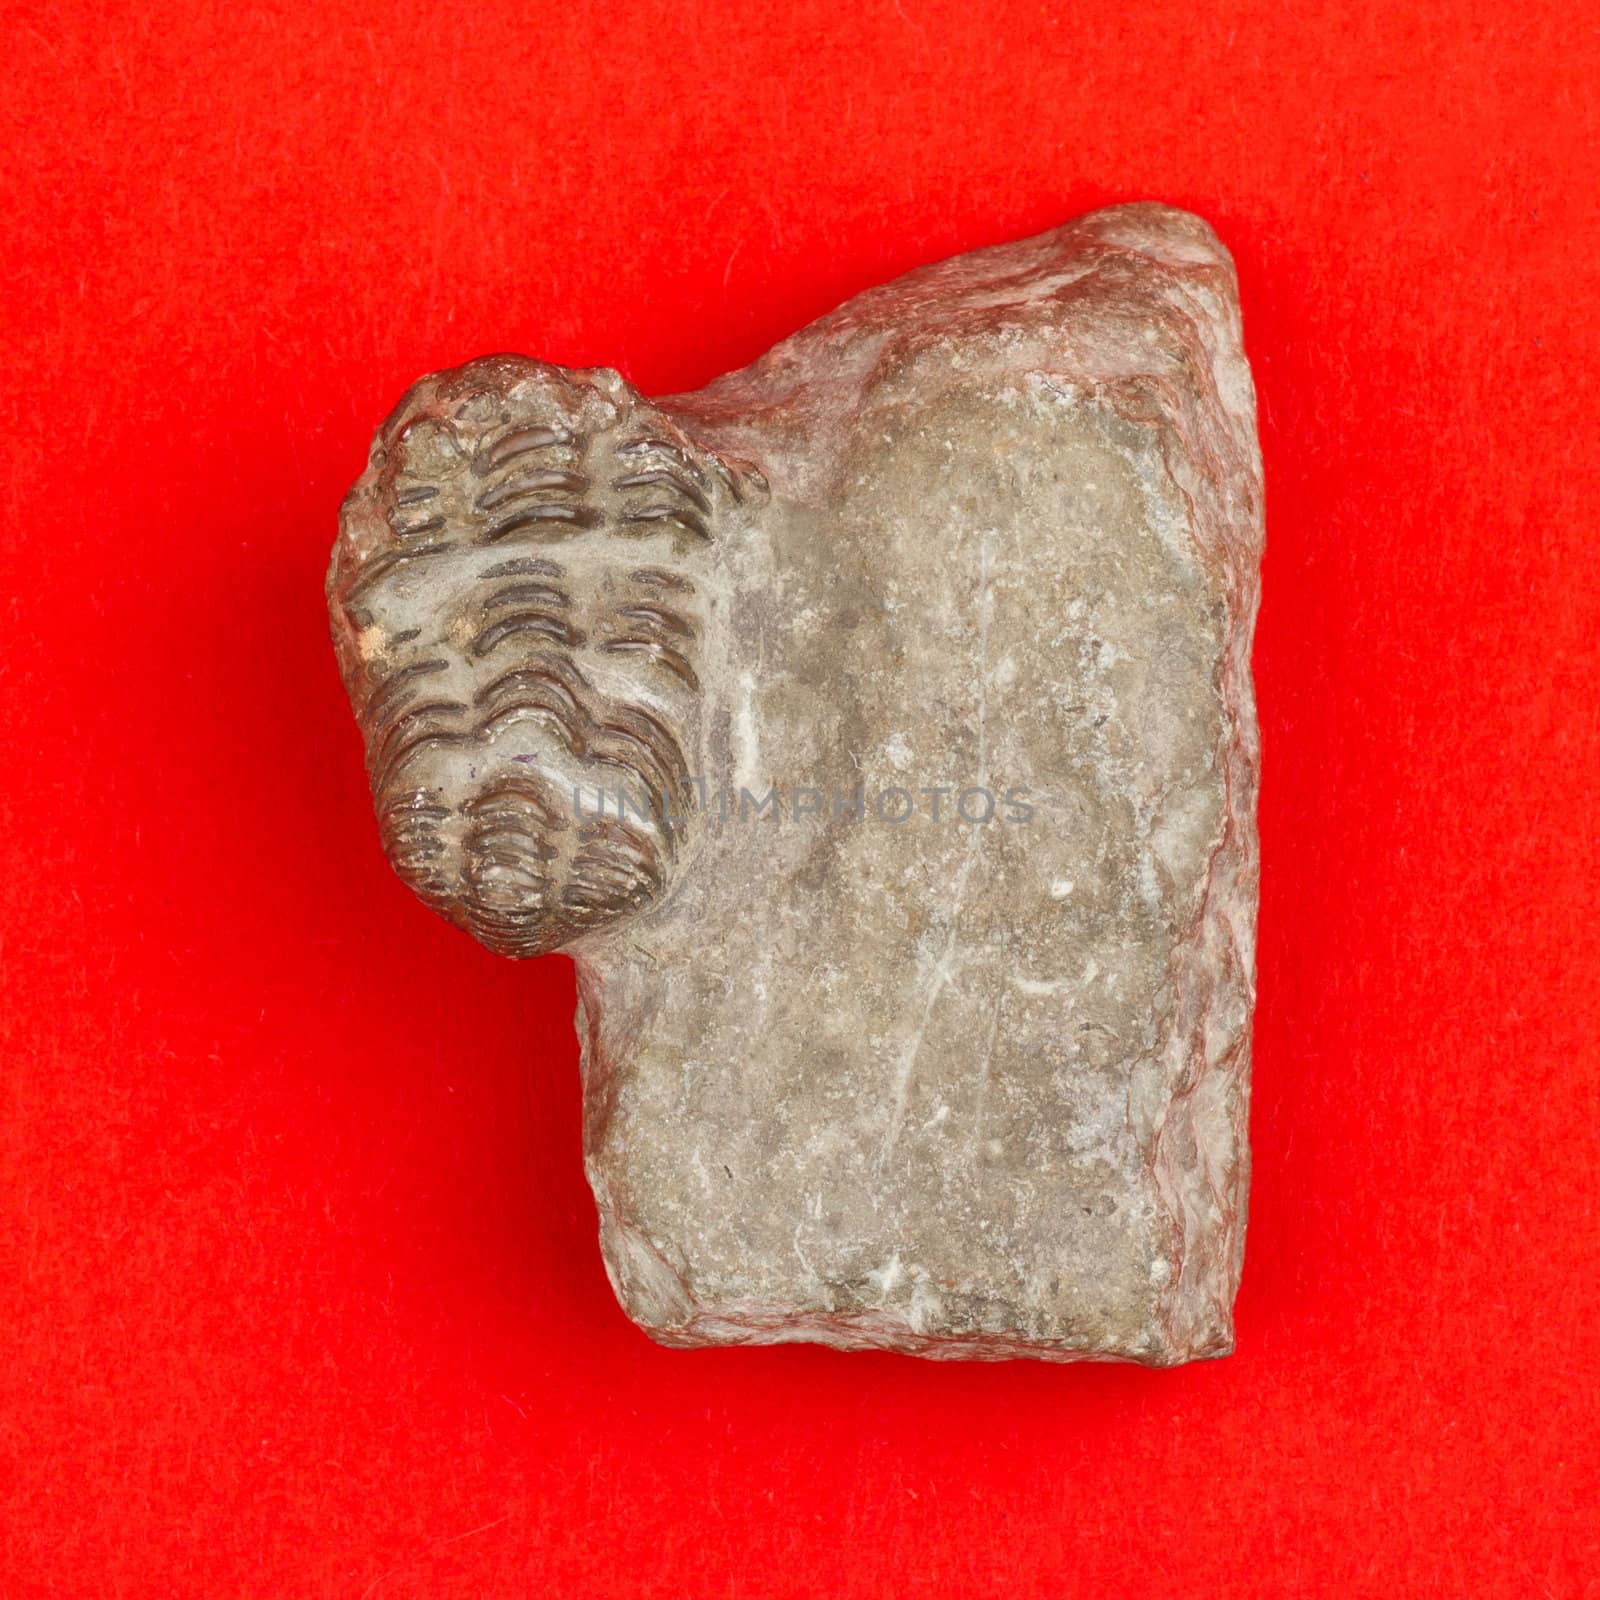 Trilobite fossil isolated on a red background